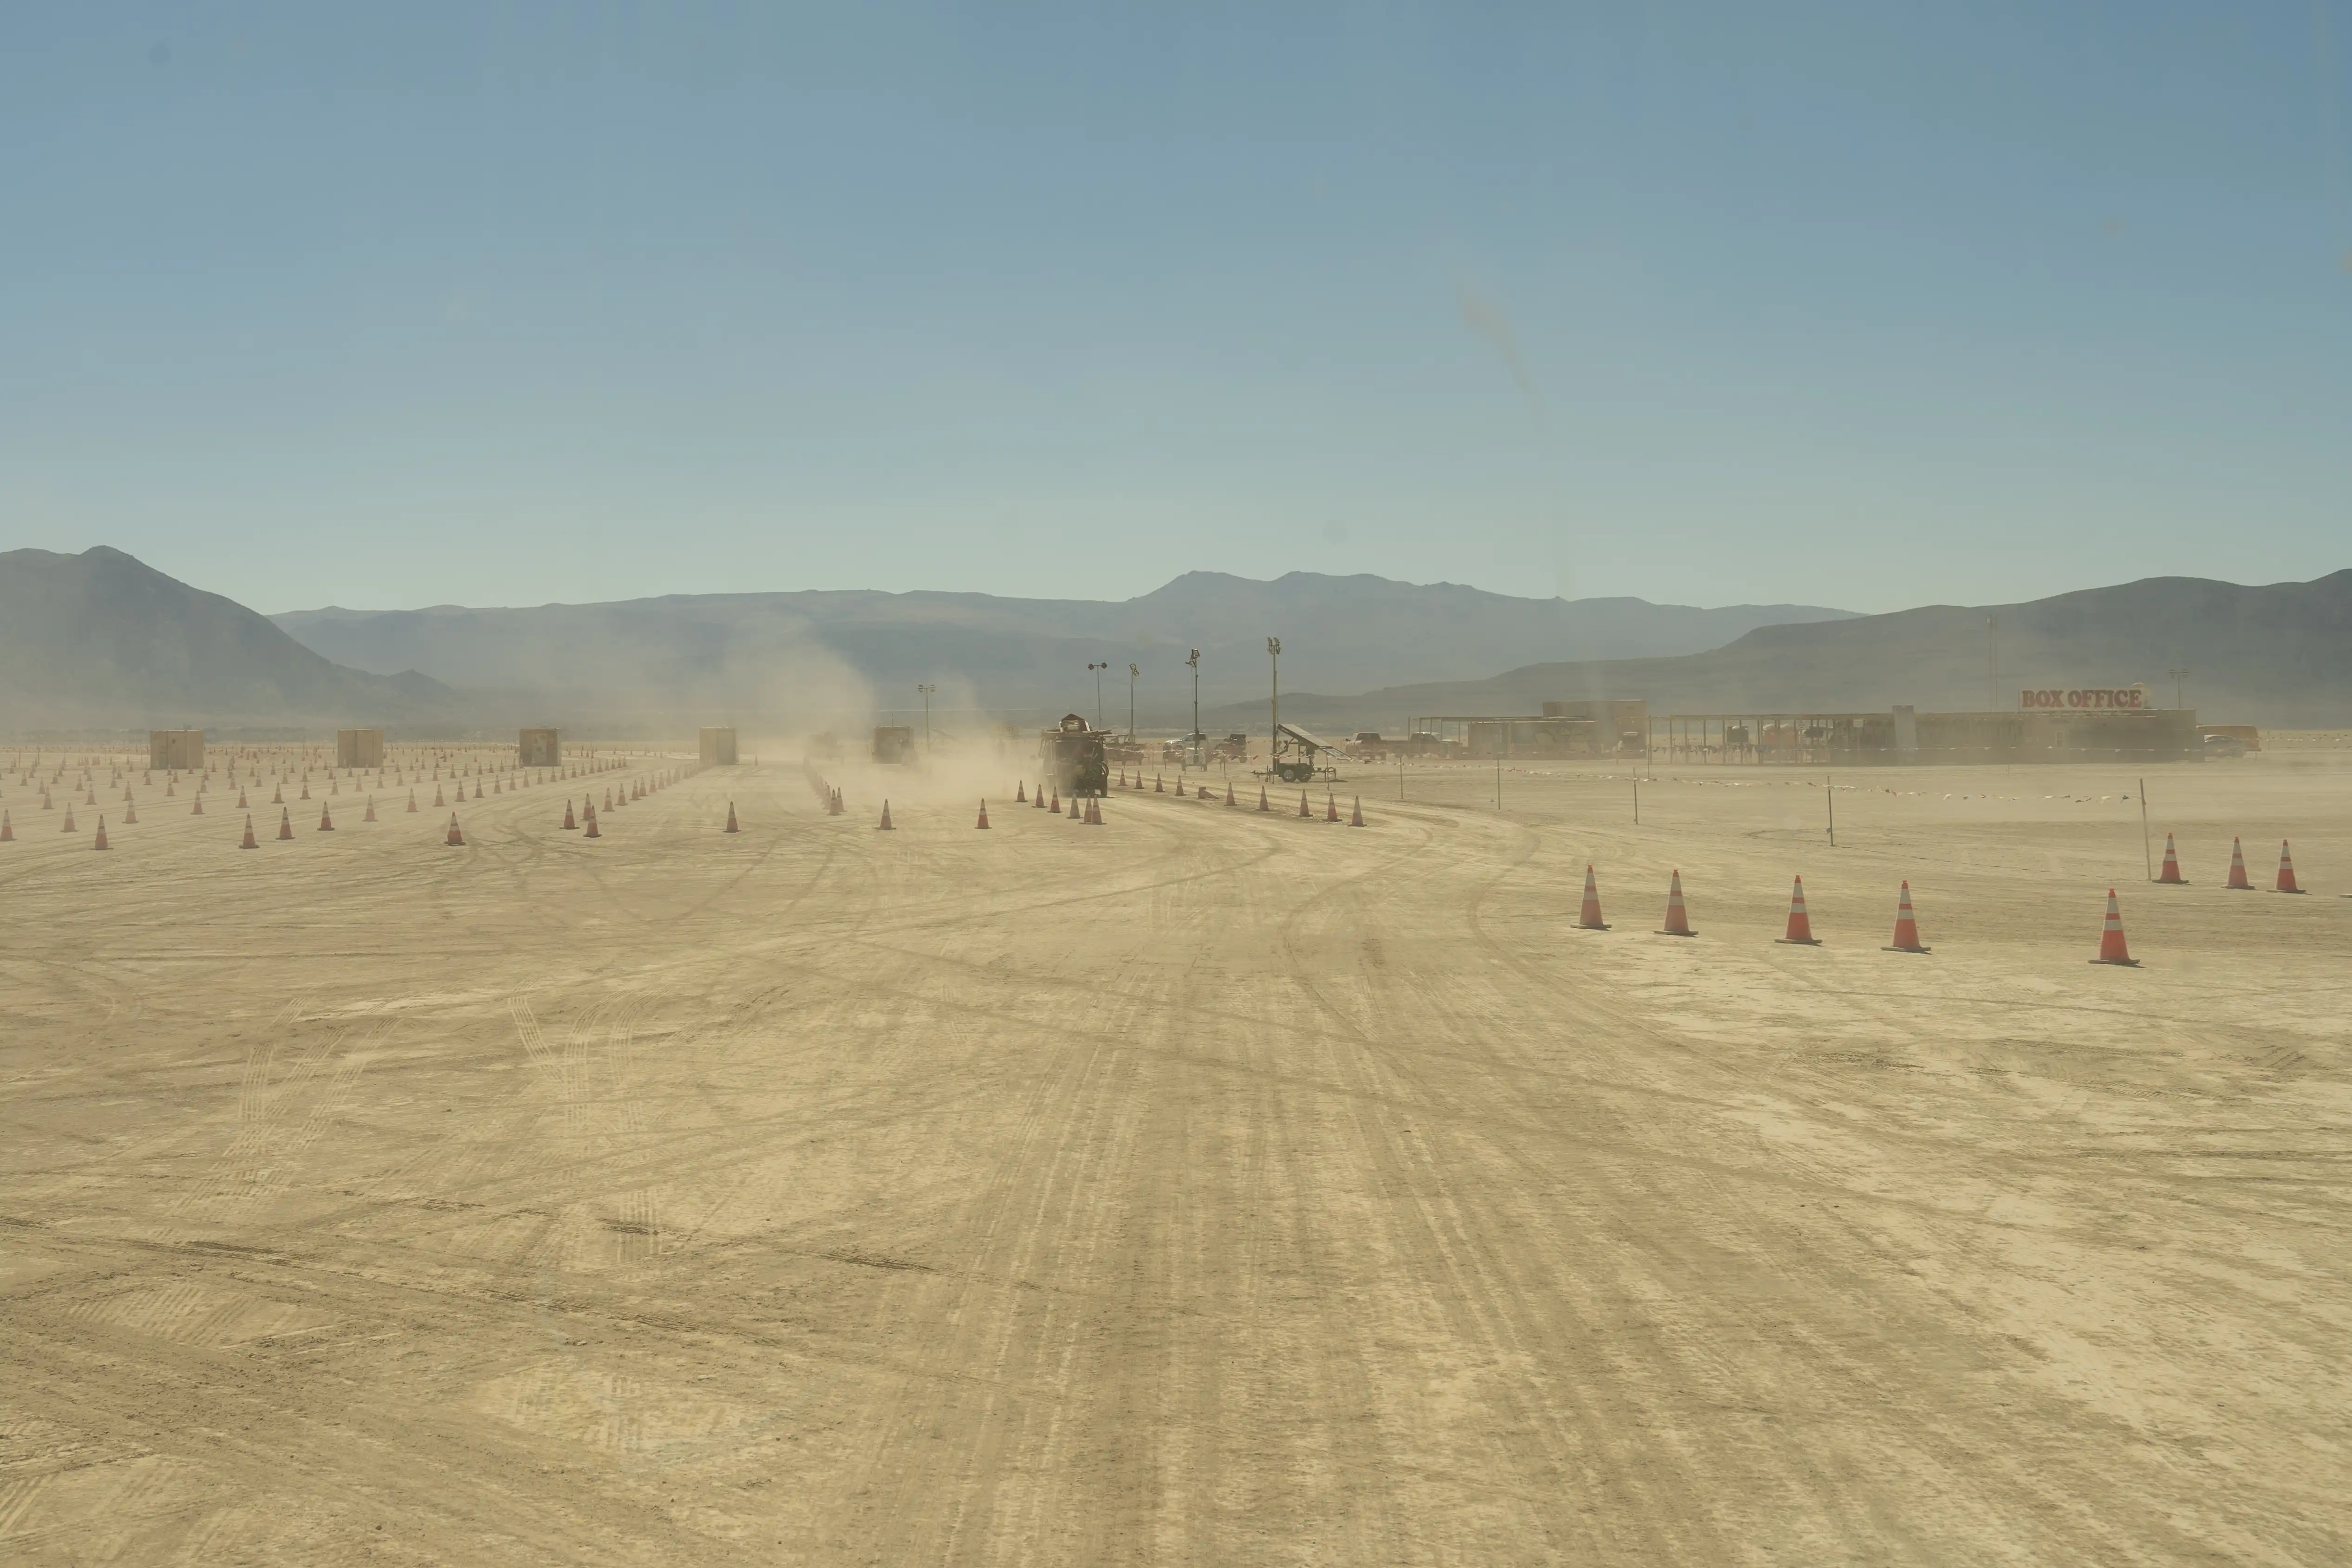 Entrance to Burning Man. A dusty, dry lake bed with mountains on the horizon. Traffic cones have been arranged to create lanes. Trucks entering are kicking up dust. A structure with a sign that says Box Office.